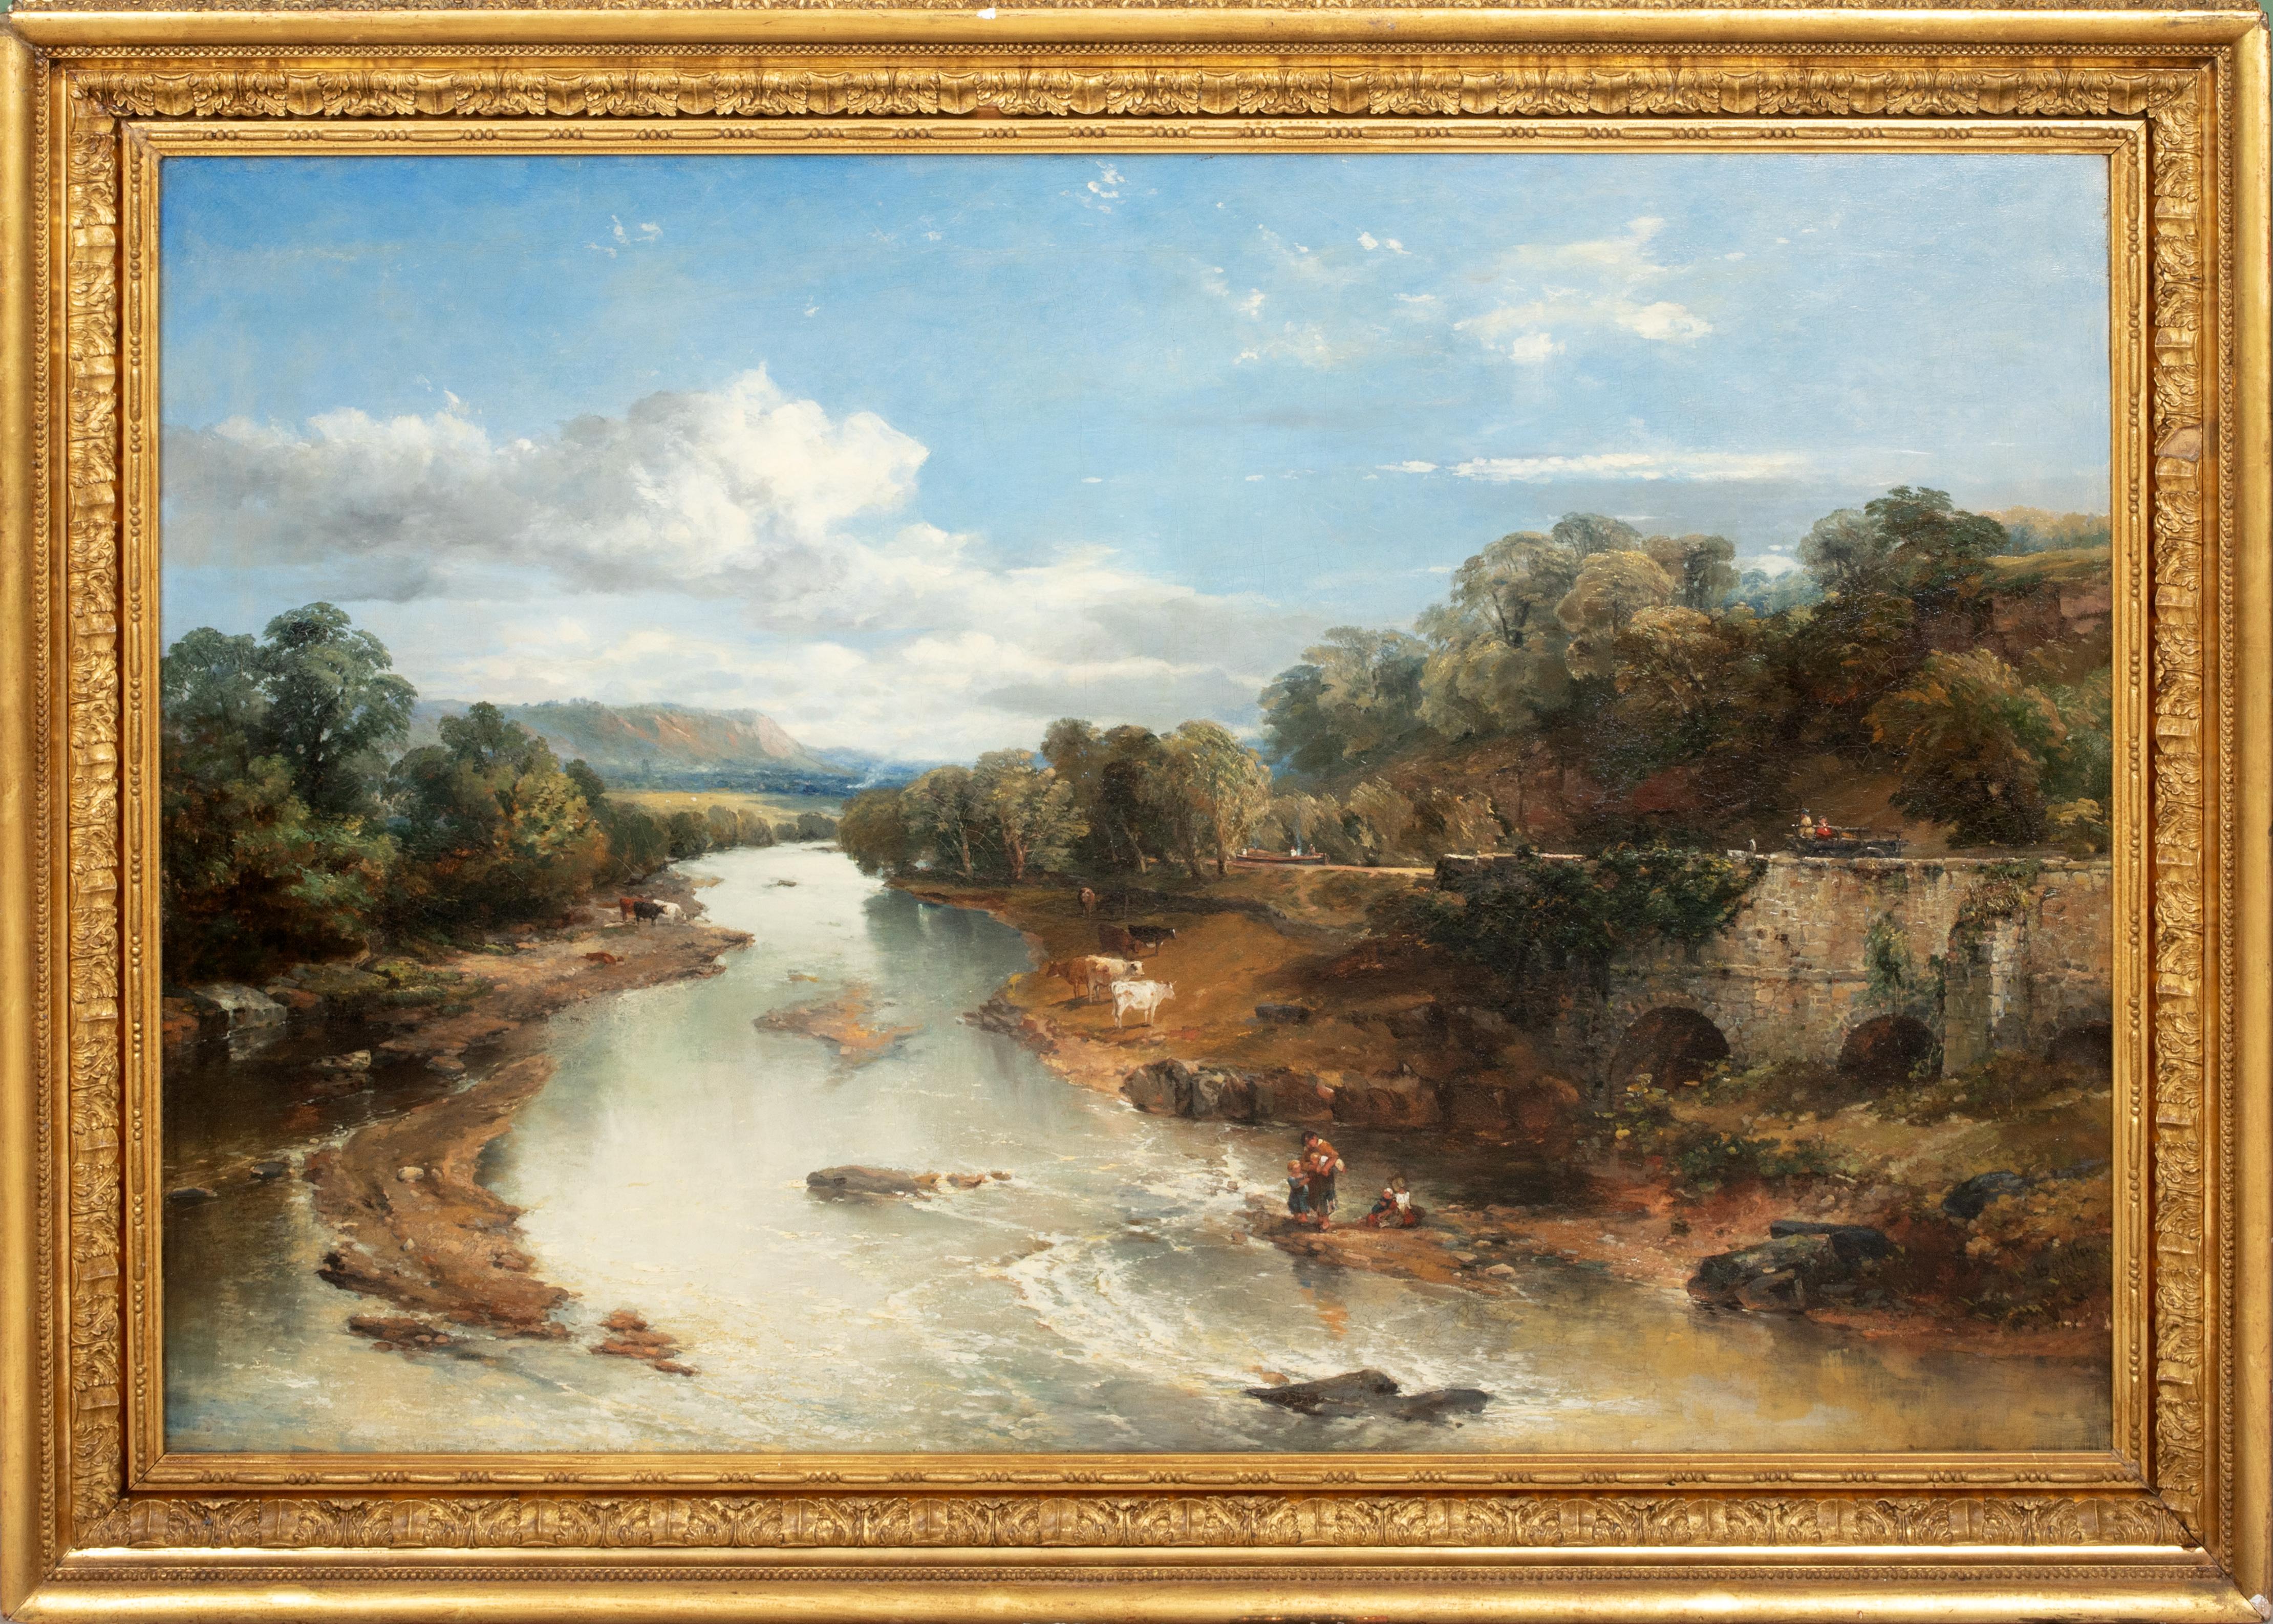 Unknown Landscape Painting -  Fishing At The Four Arches, Bingley, Yorkshire, Joseph Clayton Bentley